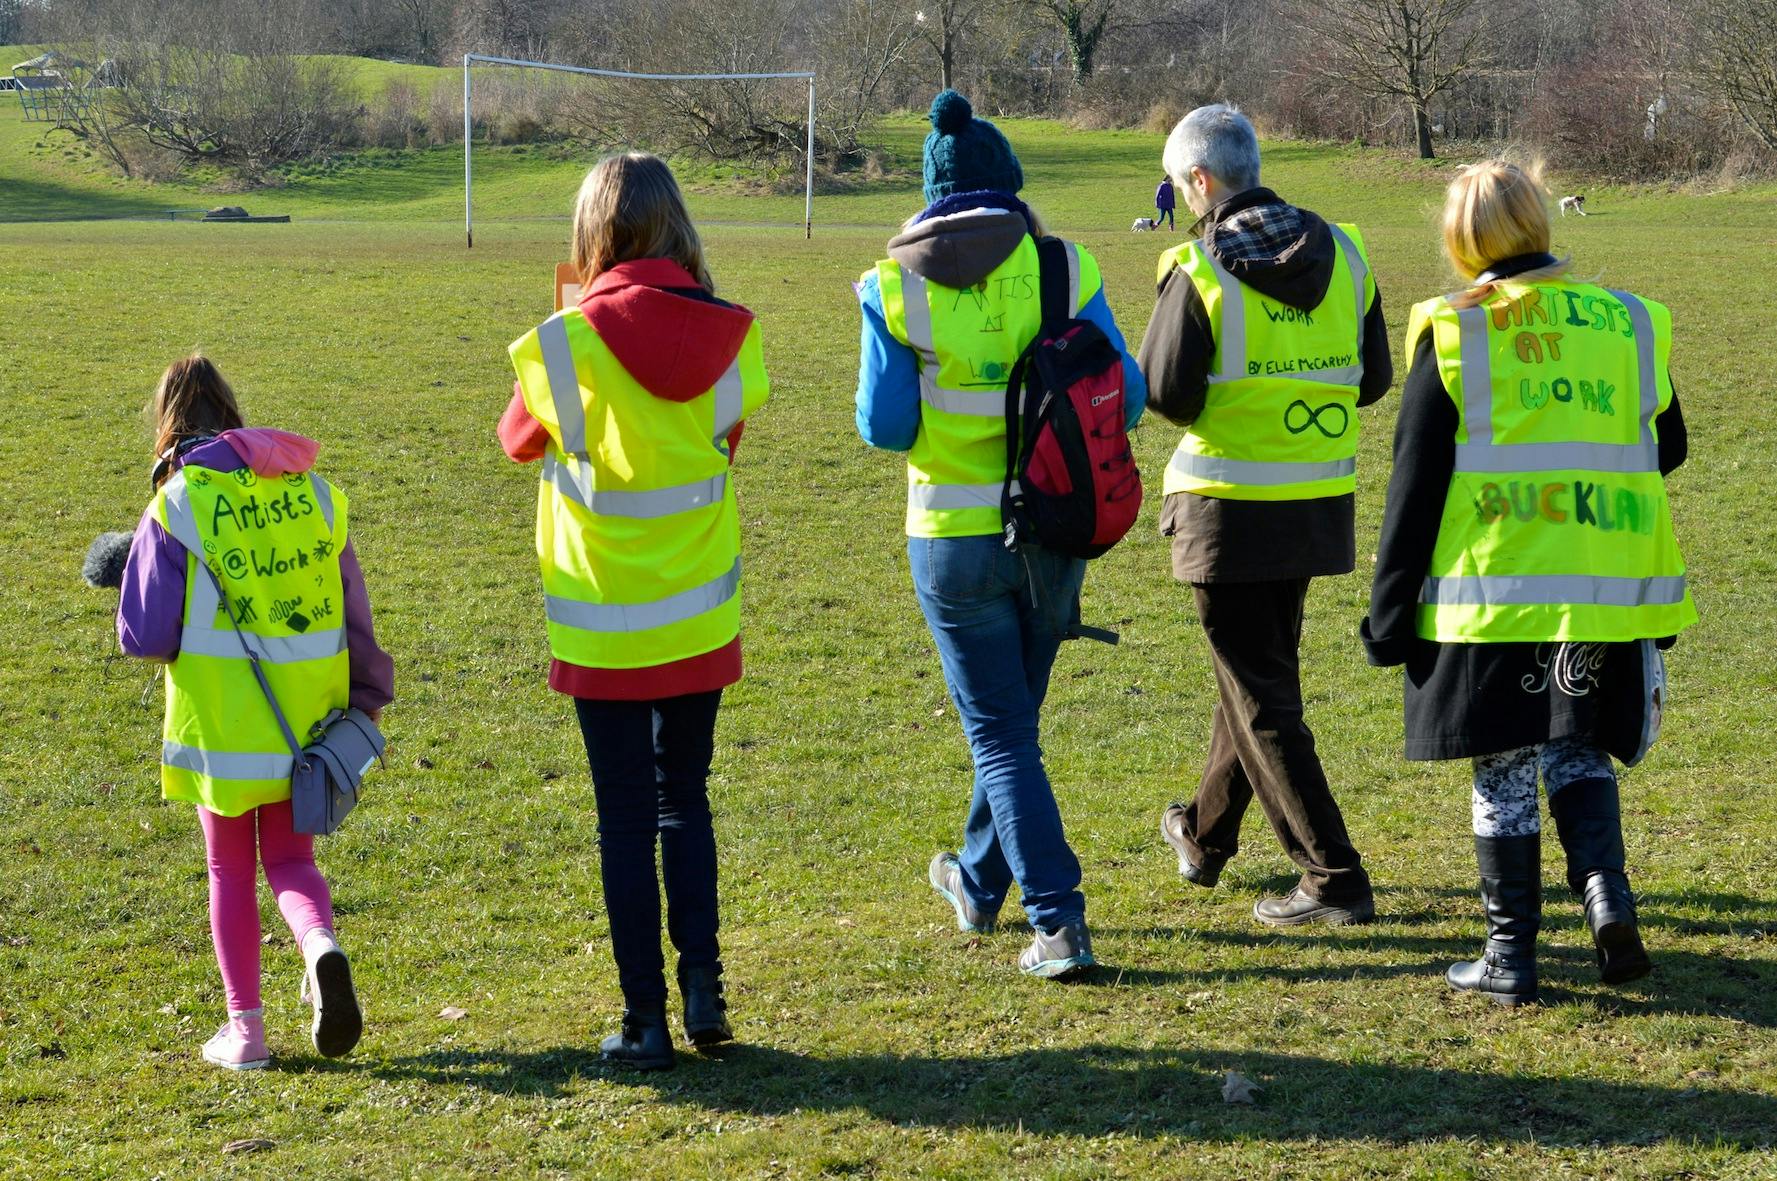 A group of adults and children wearing jackets saying 'artist at work' walking across a playing field